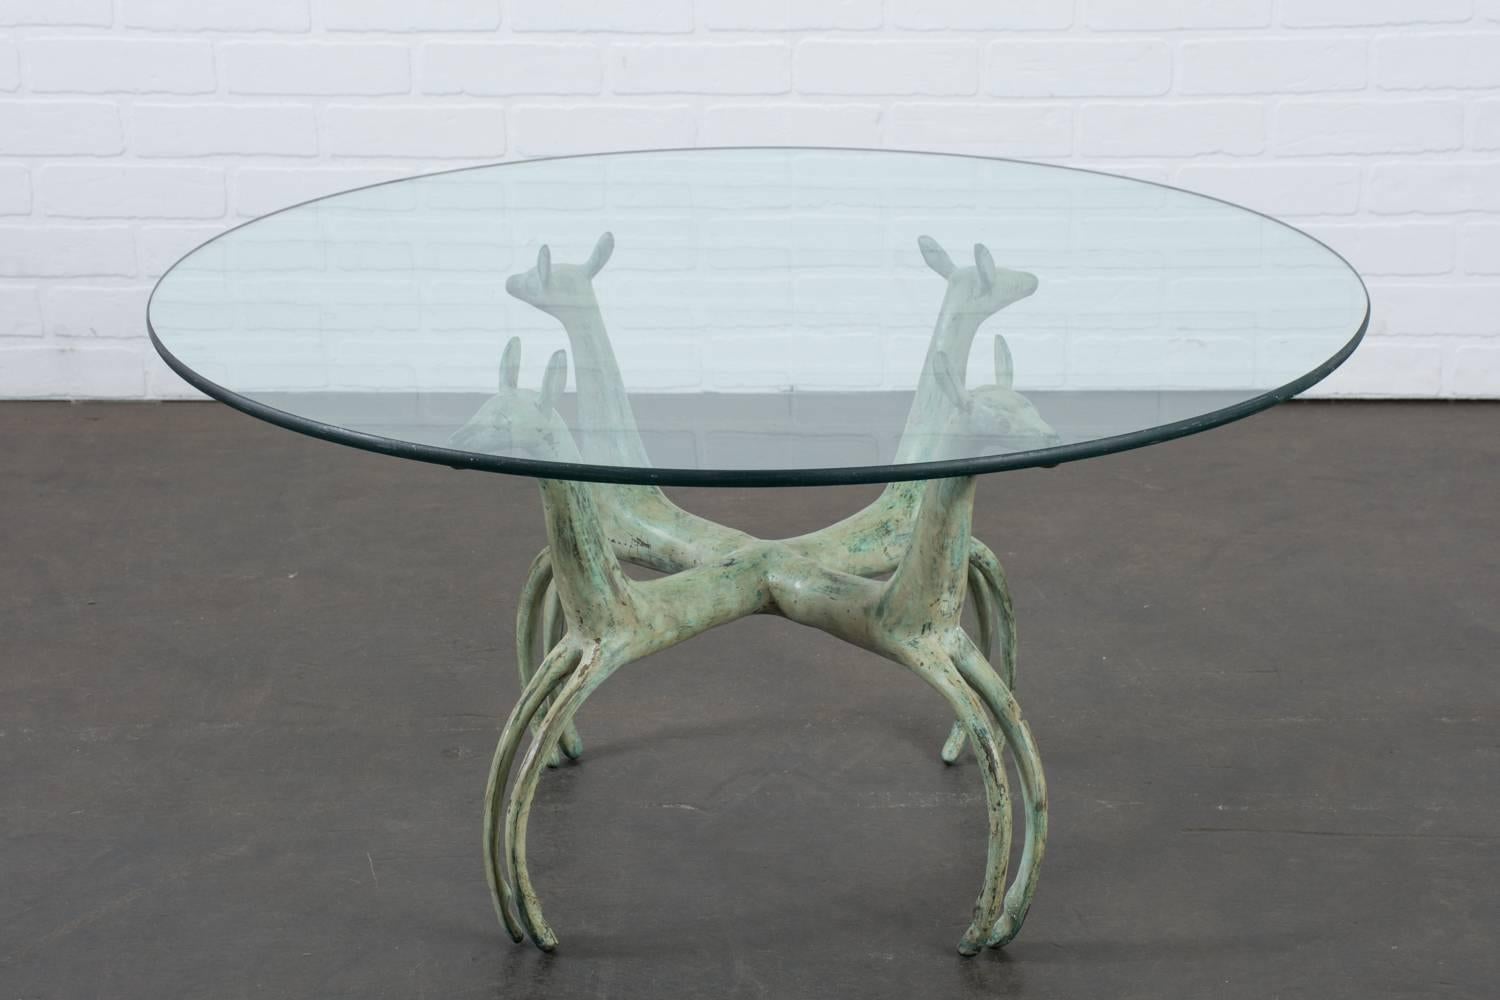 This vintage coffee table is the manner of Armand Albert Rateau. It features a bronze base that is made up of four joined deer with a wonderful green patina and a round glass top.
